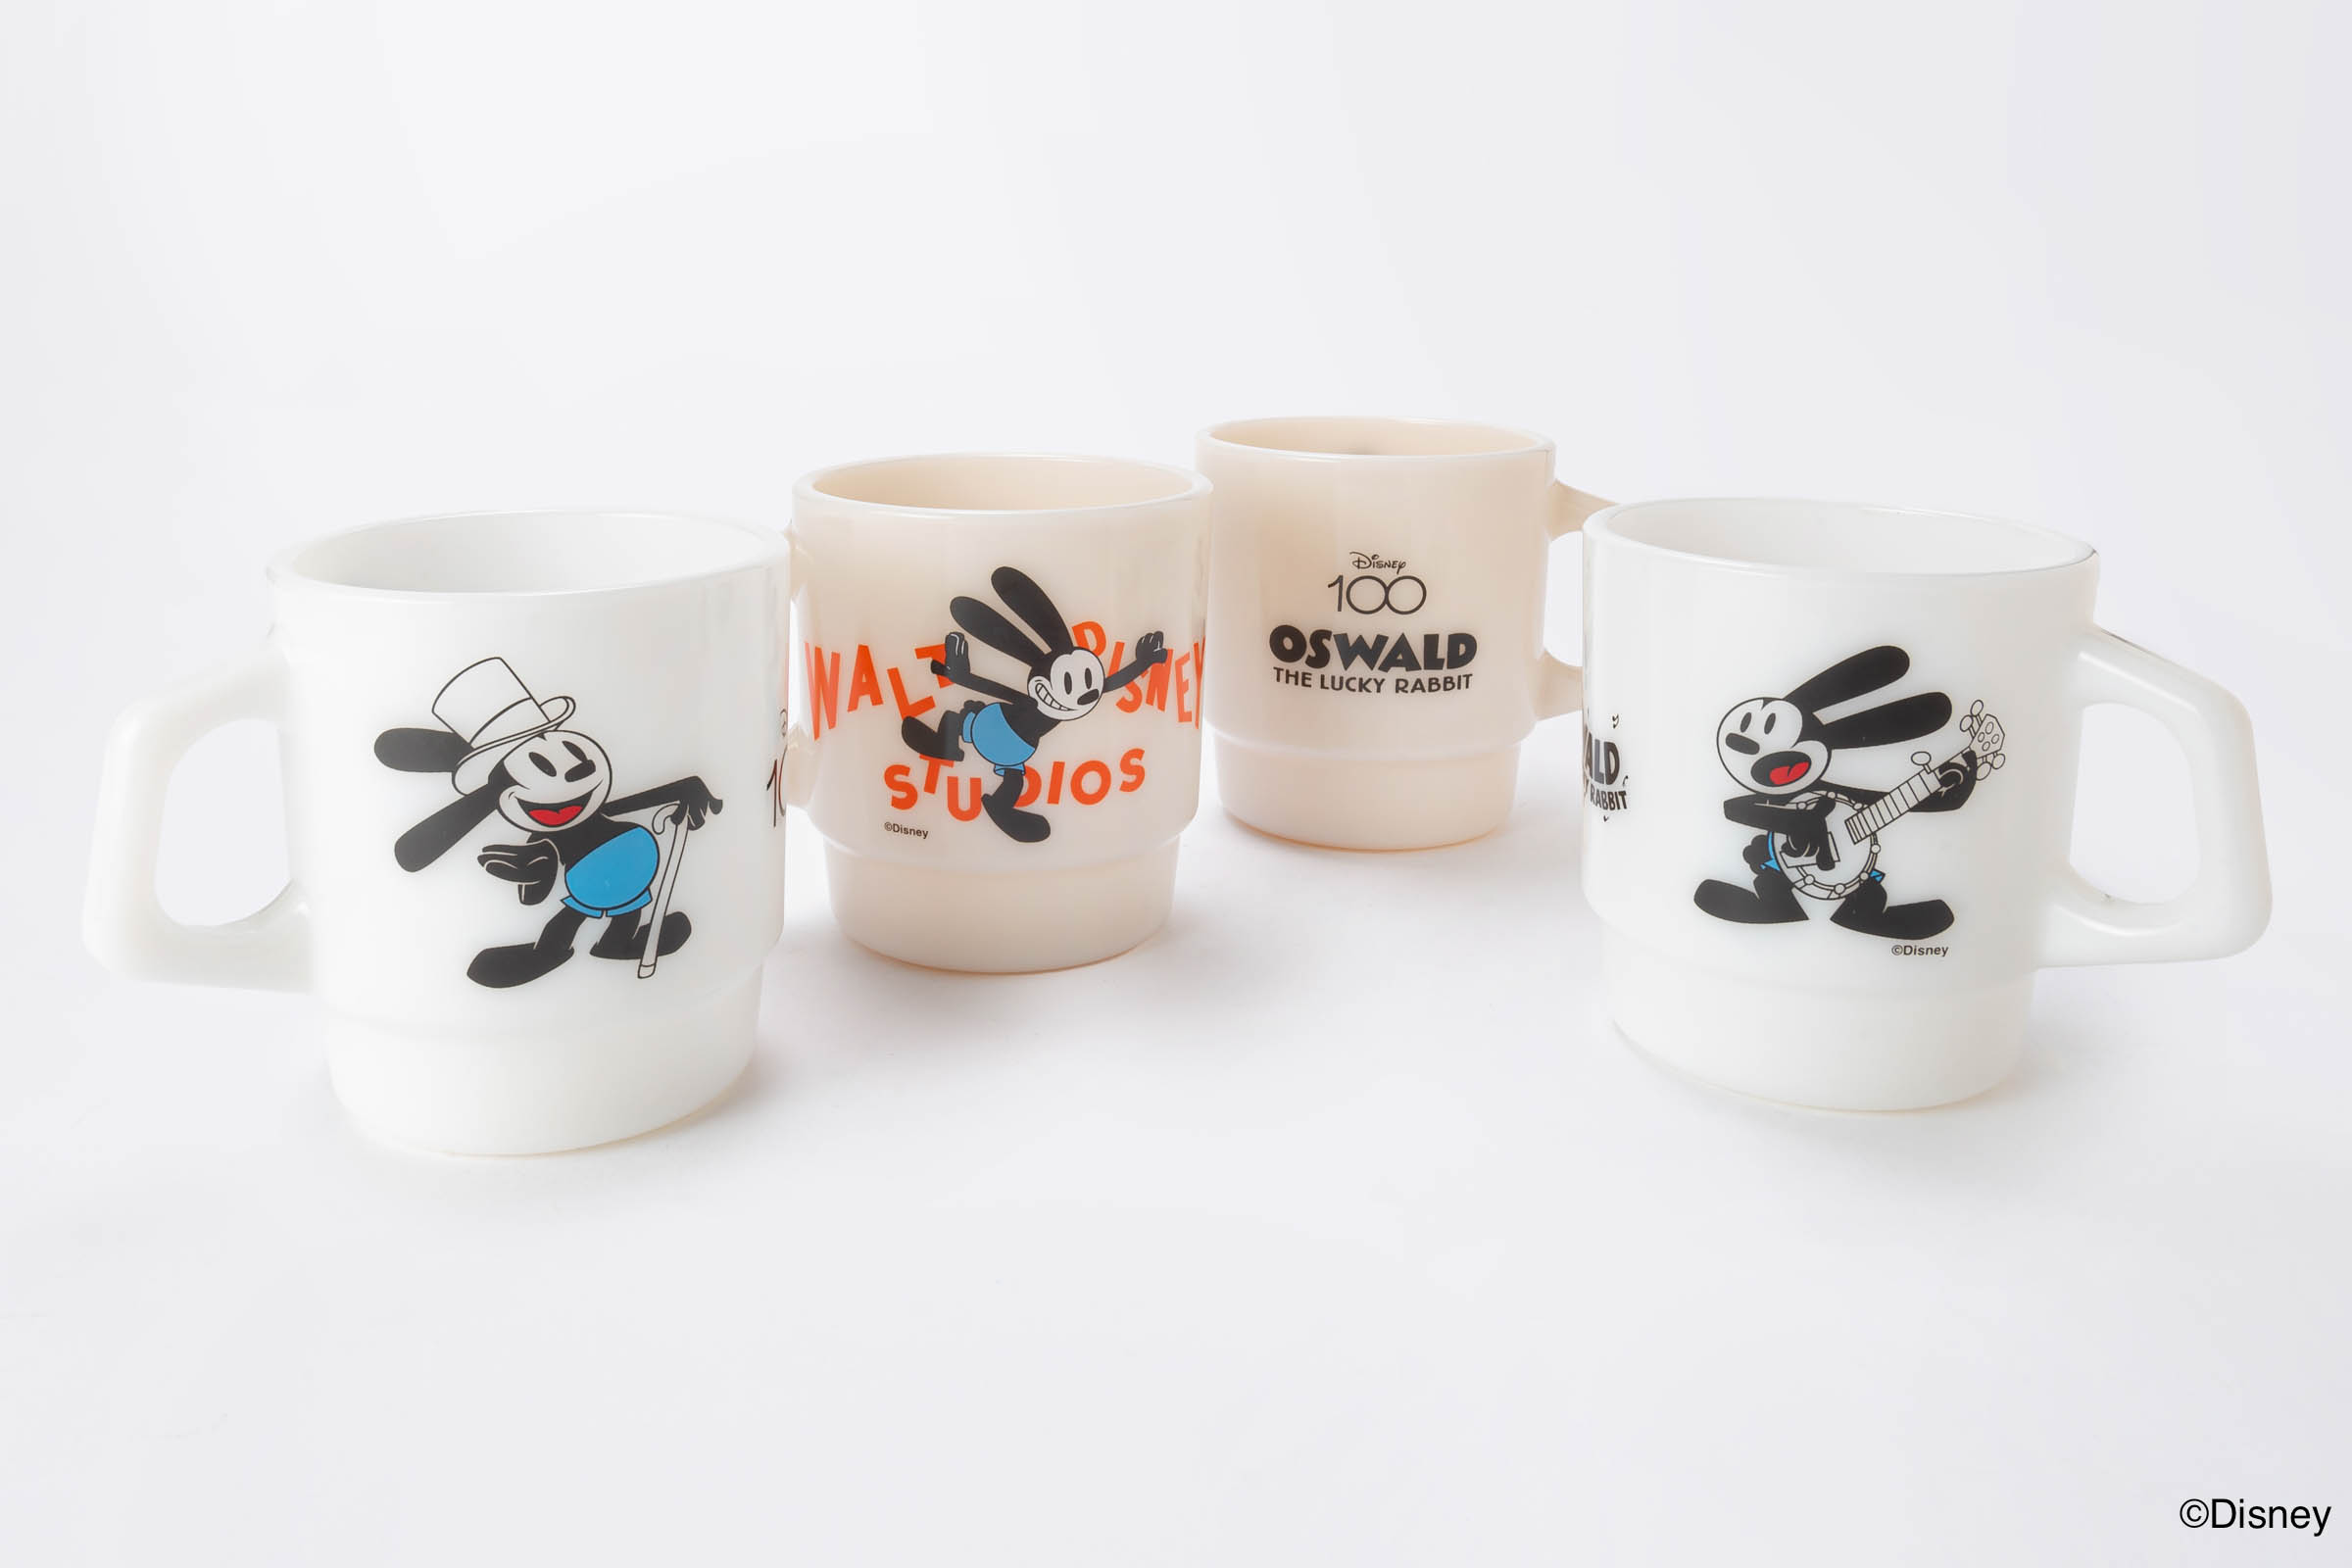 Fire-King スタッキングマグ Oswald the Lucky Rabbit [Disney100 OSWALD]